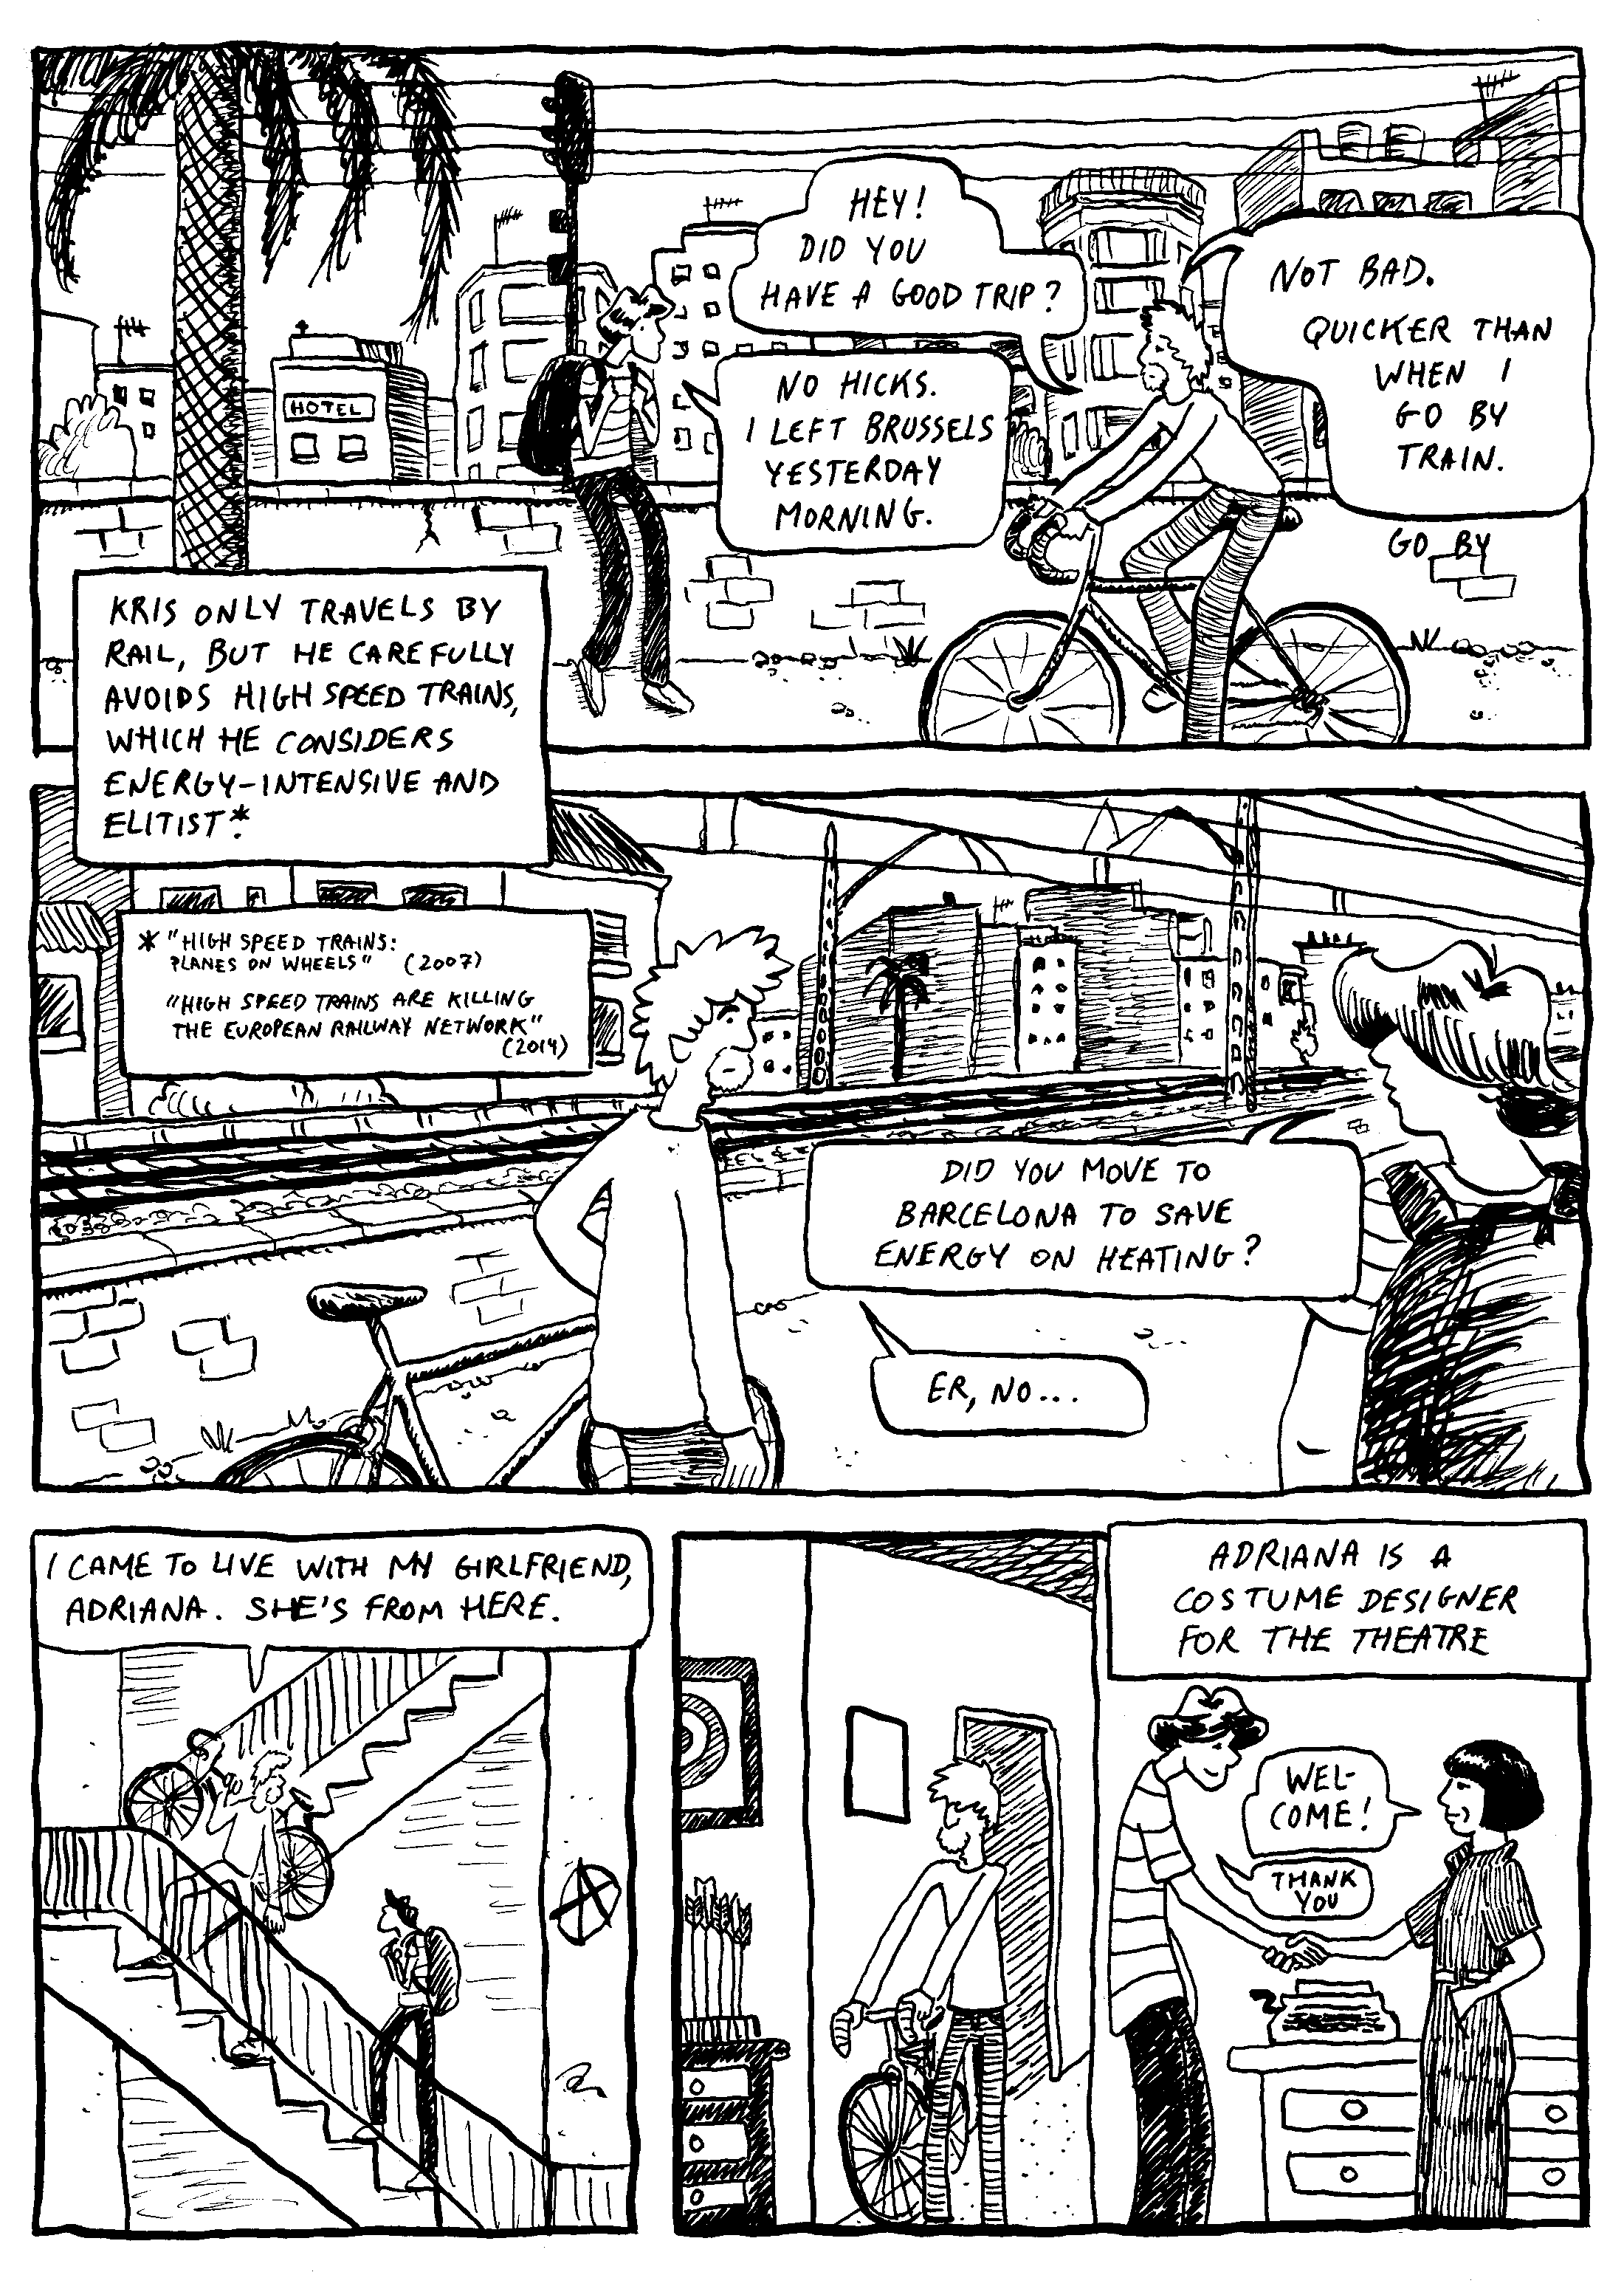 Back to the future of technology, page 3